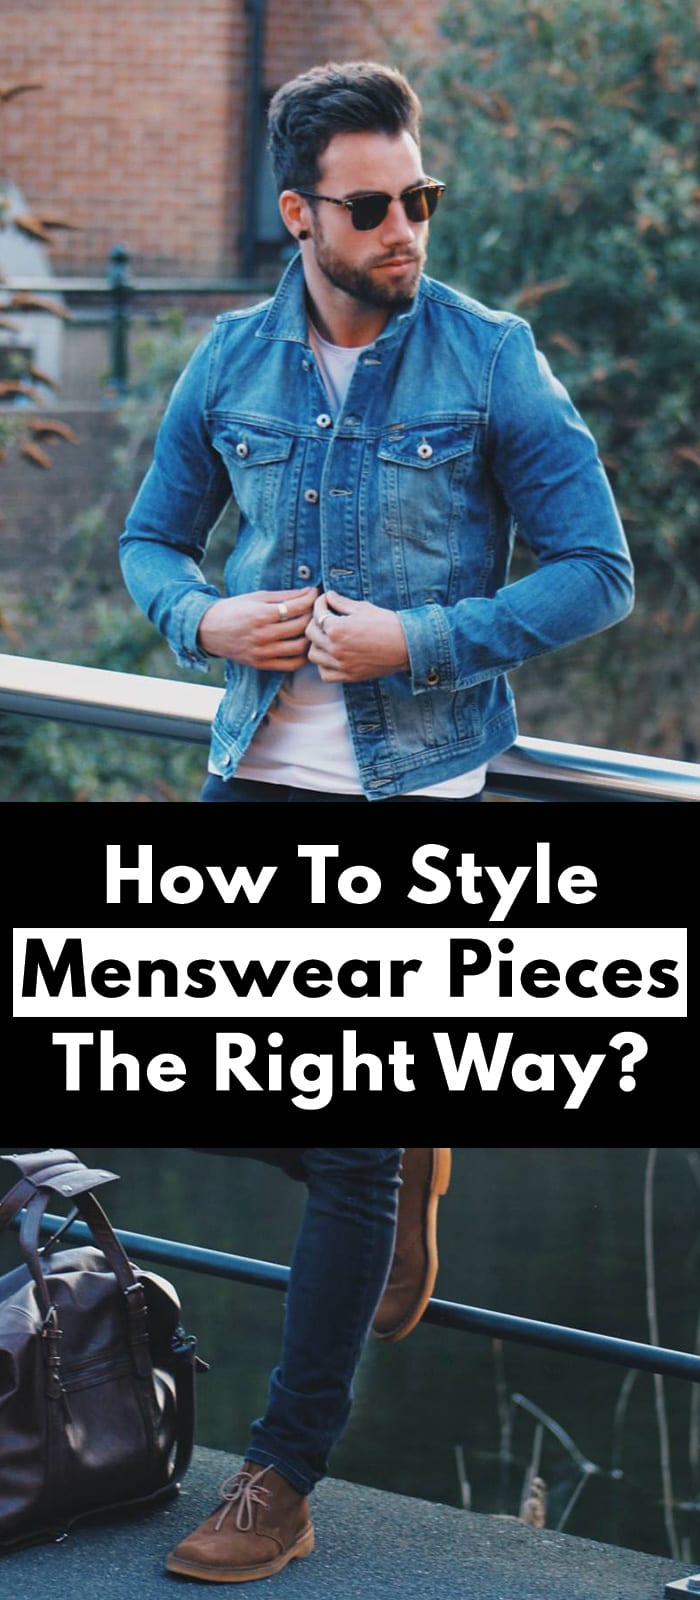 How To Style Menswear Pieces The Right Way